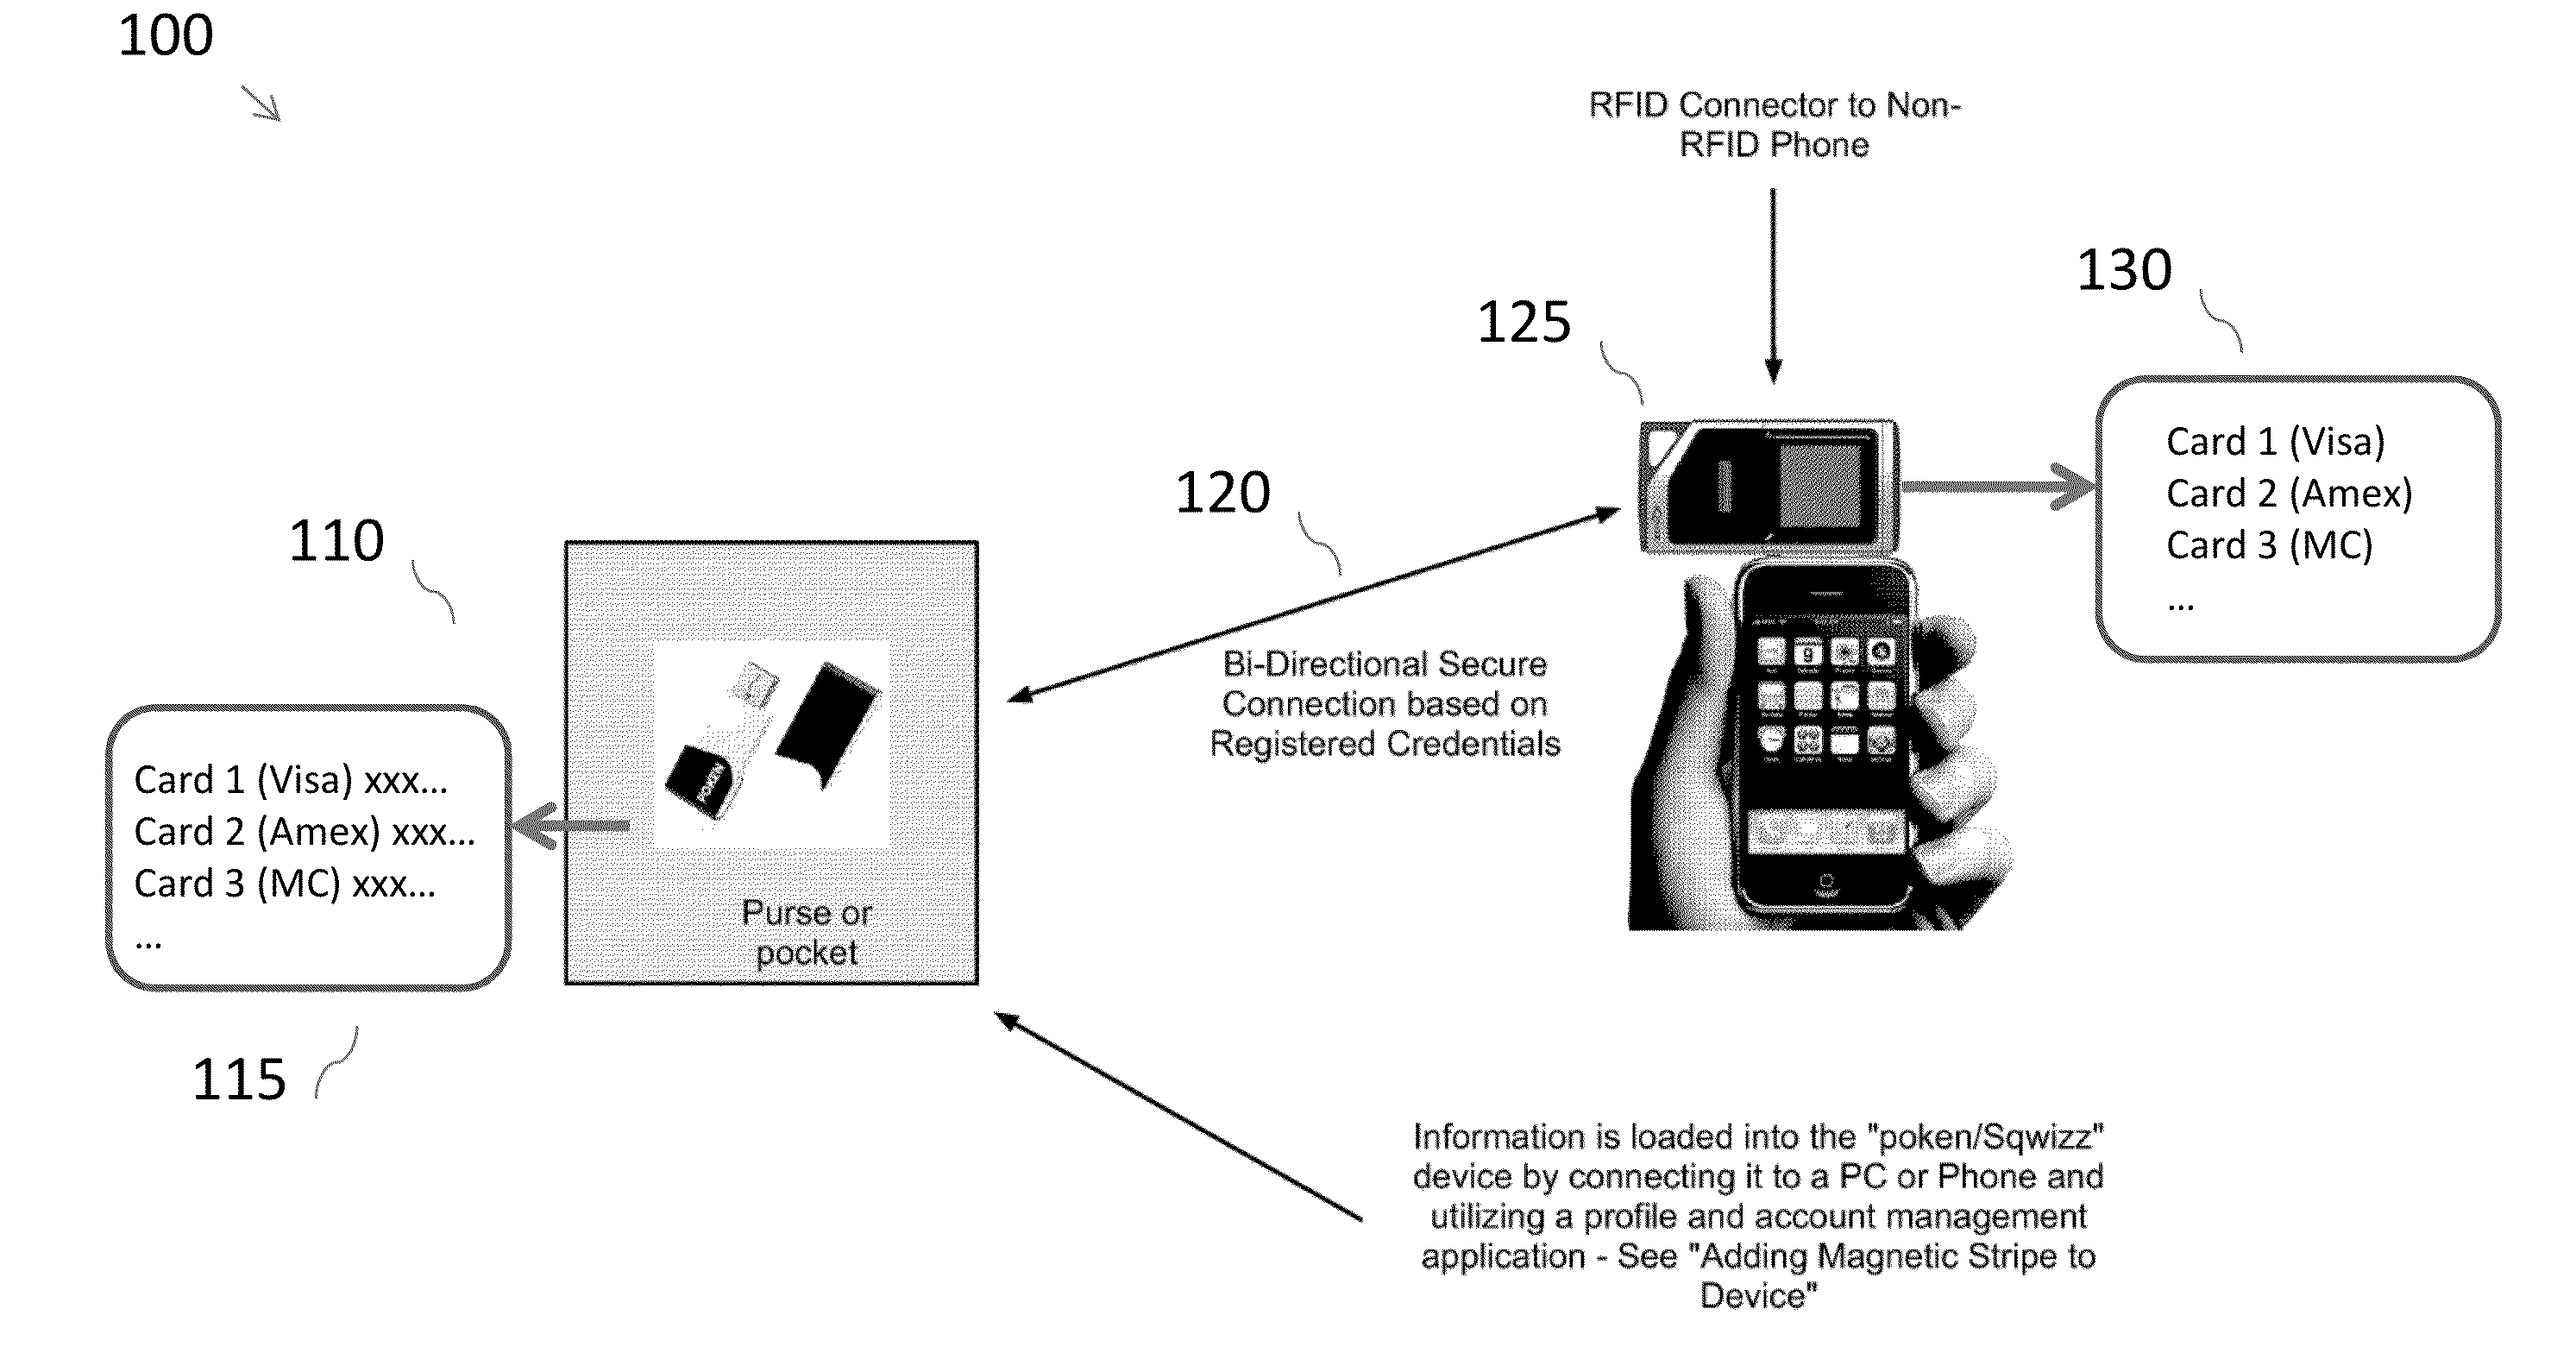 Storing and forwarding credentials securely from one RFID device to another